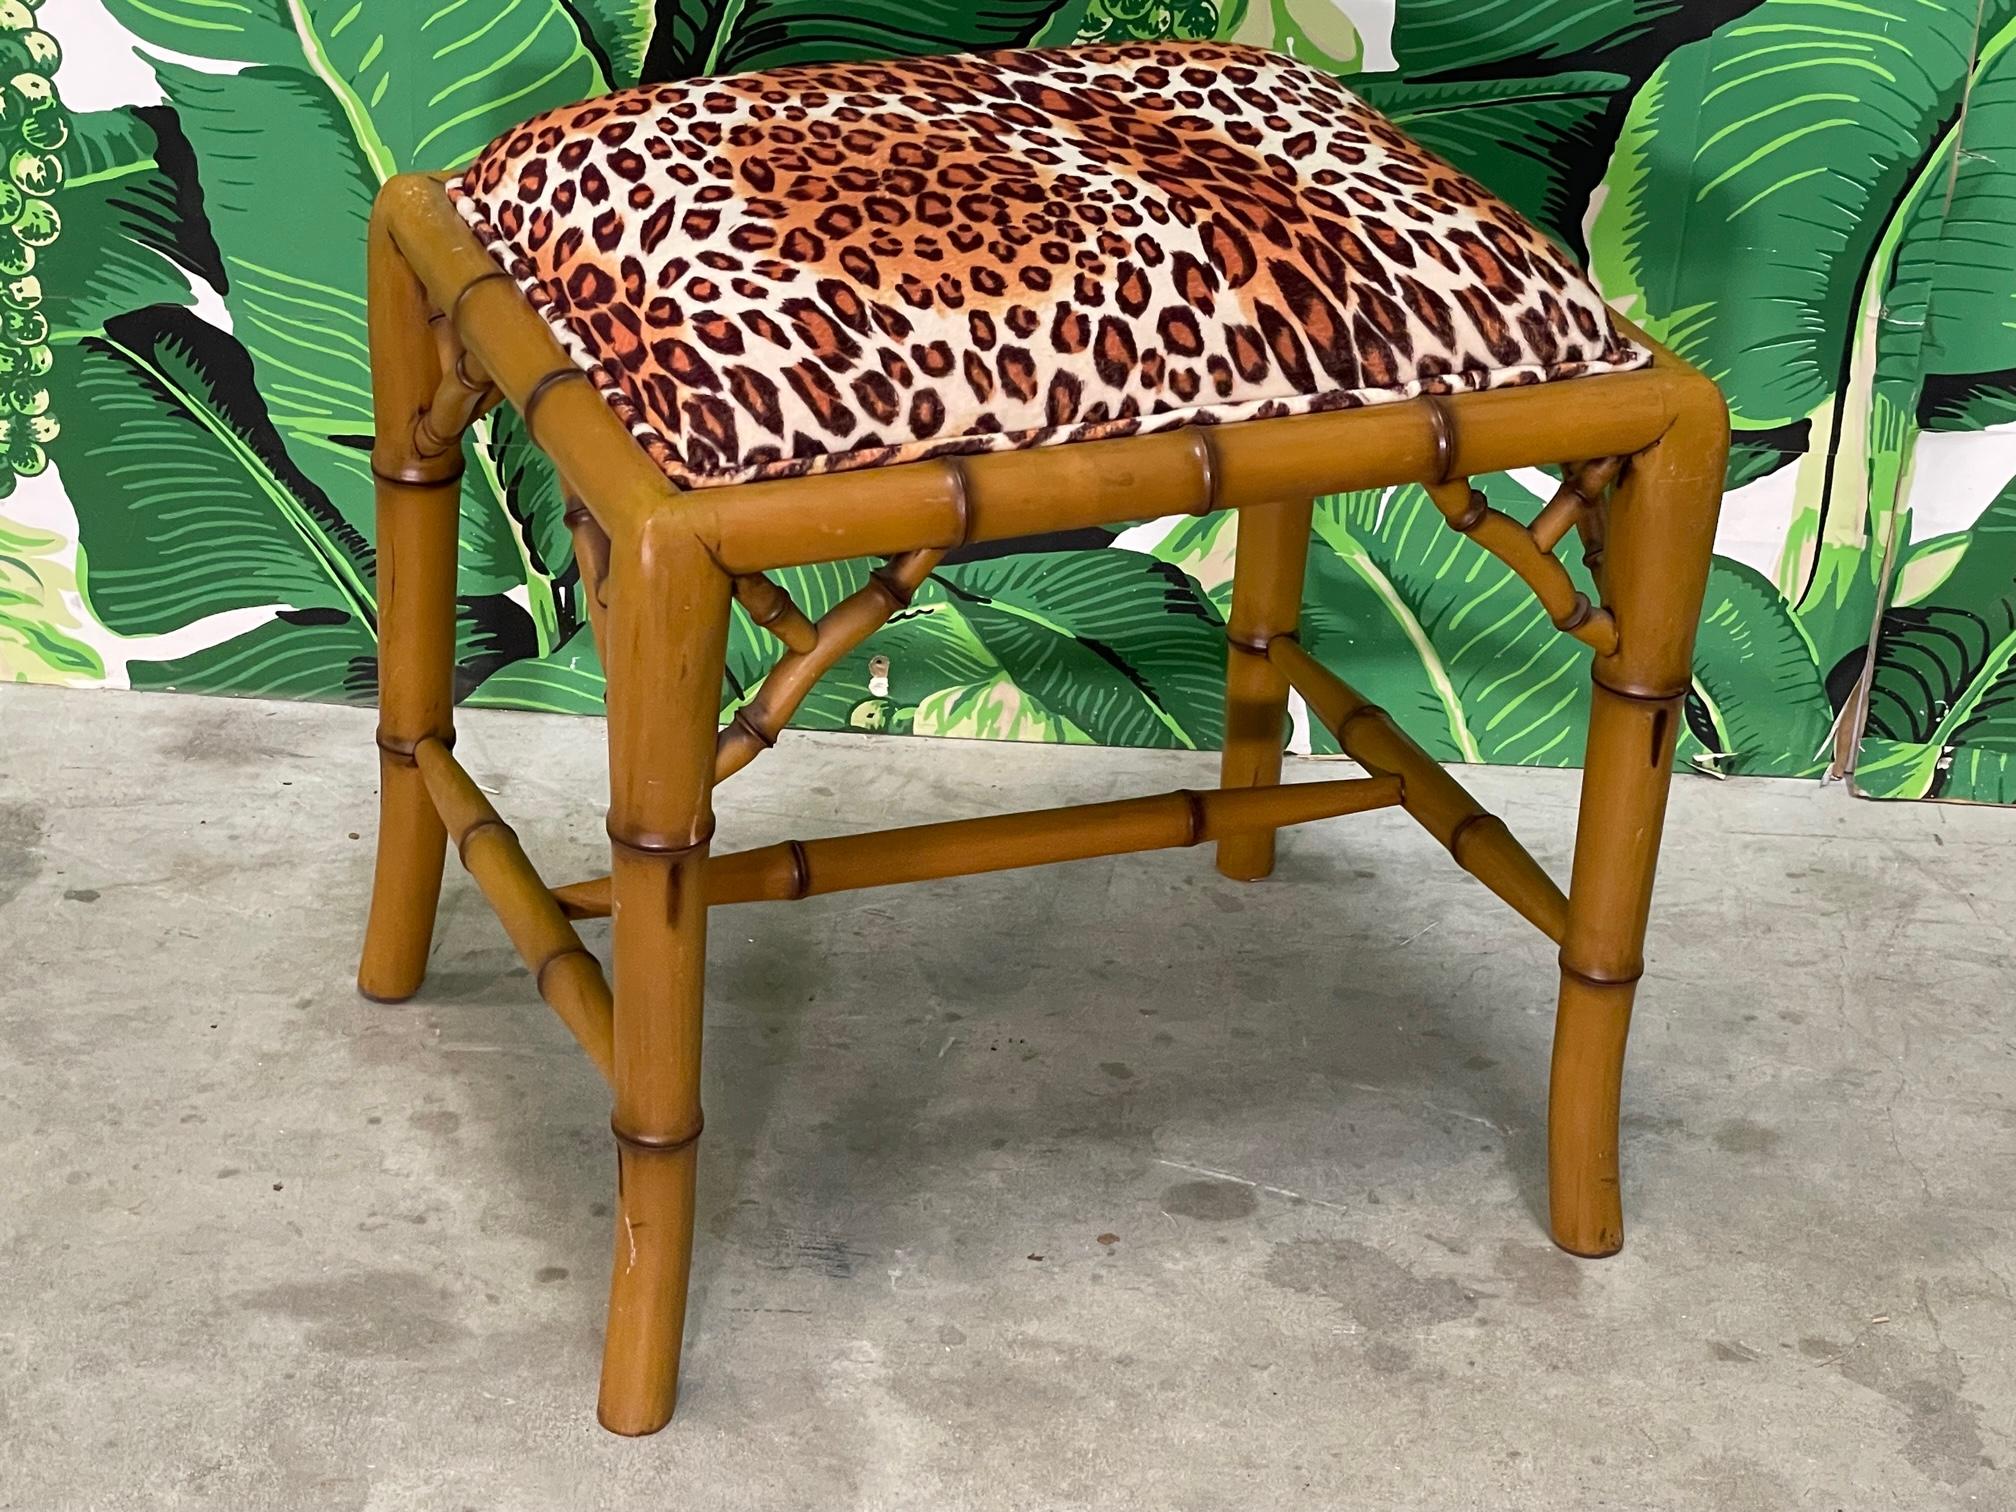 Faux bamboo footstool or ottoman features a soft, leopard print fabric and slightly splayed legs. Good condition with imperfections consistent with age, see photos for condition details.
For a shipping quote to your exact zip code, please message